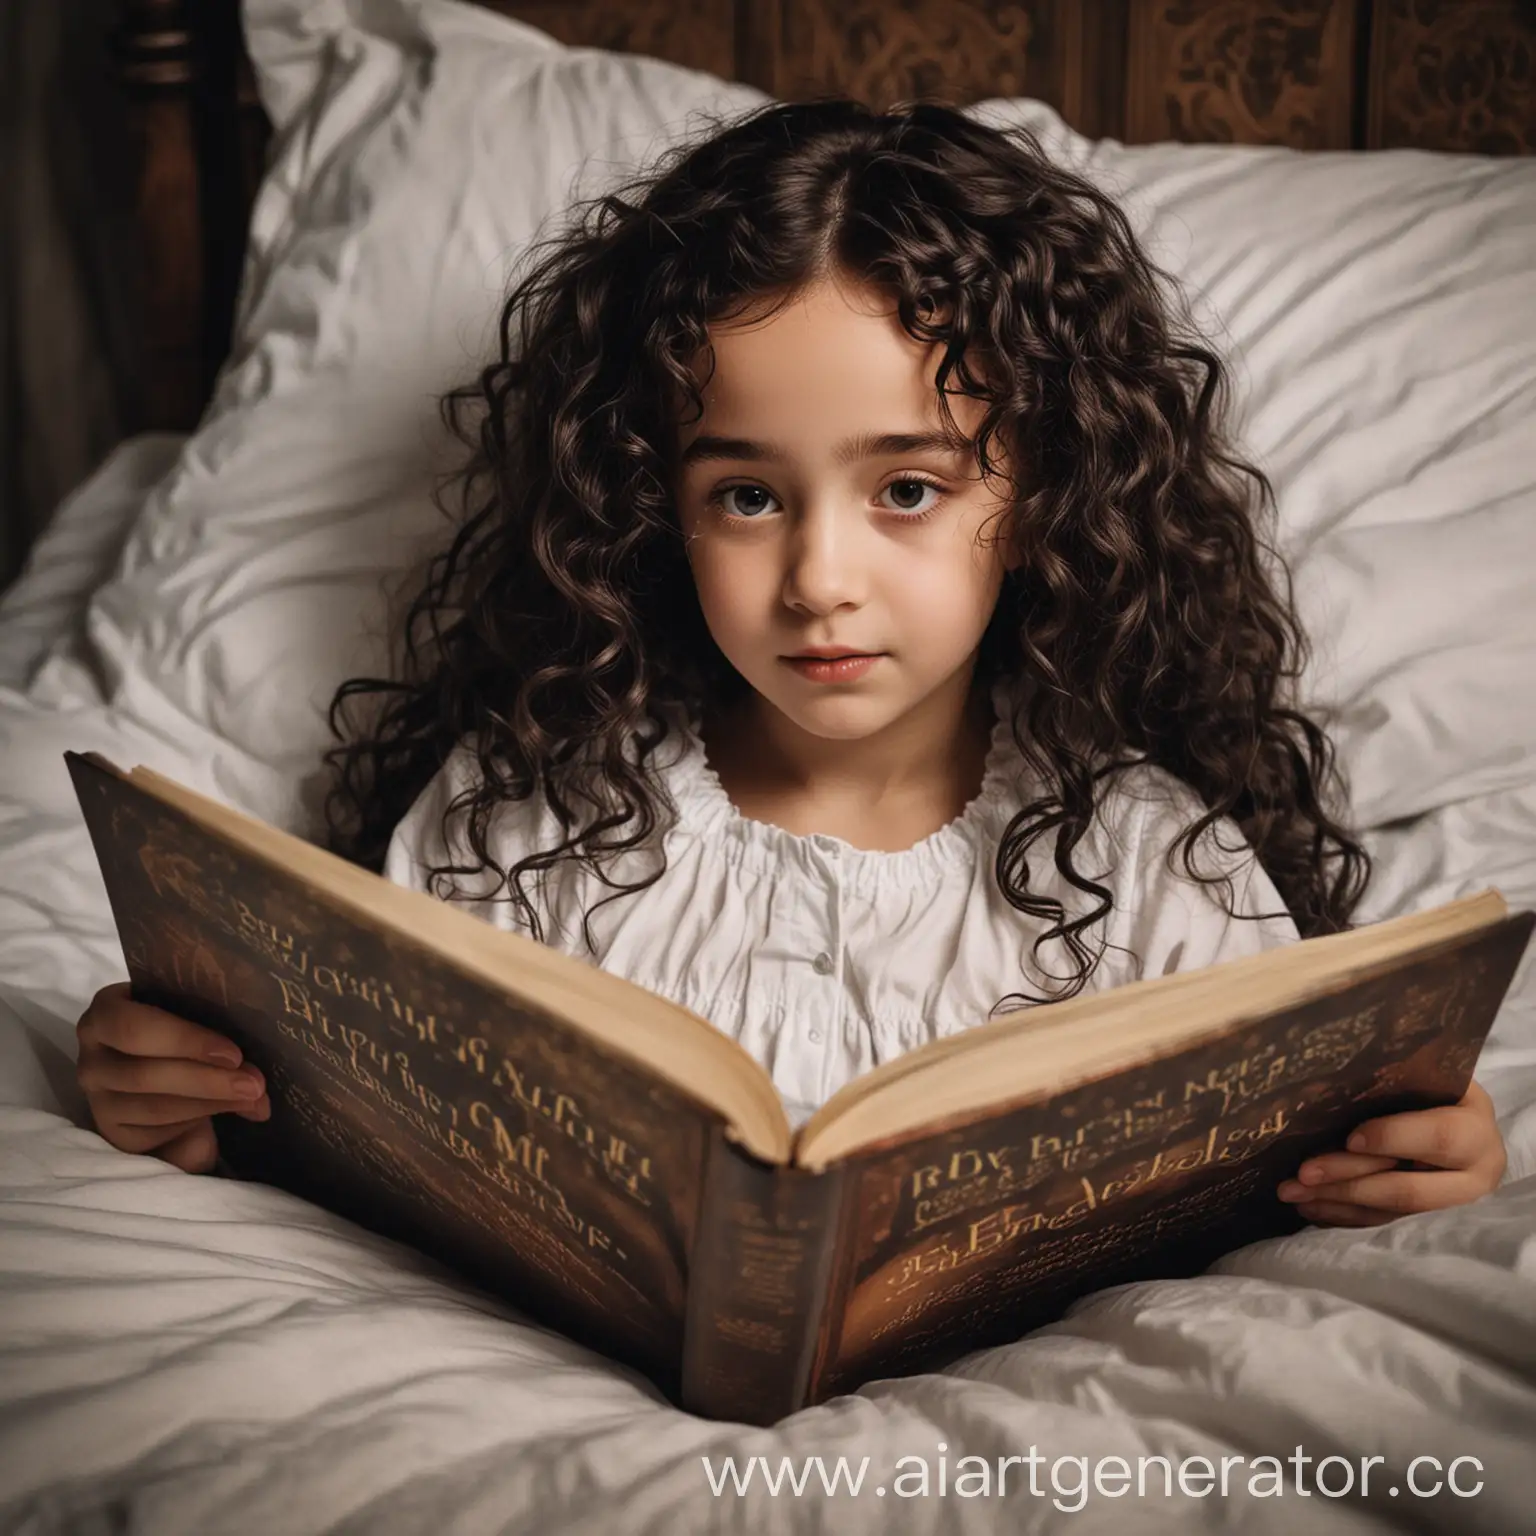 Draco-Malfoy-Reading-Bedtime-Story-to-Dark-CurlyHaired-Girl